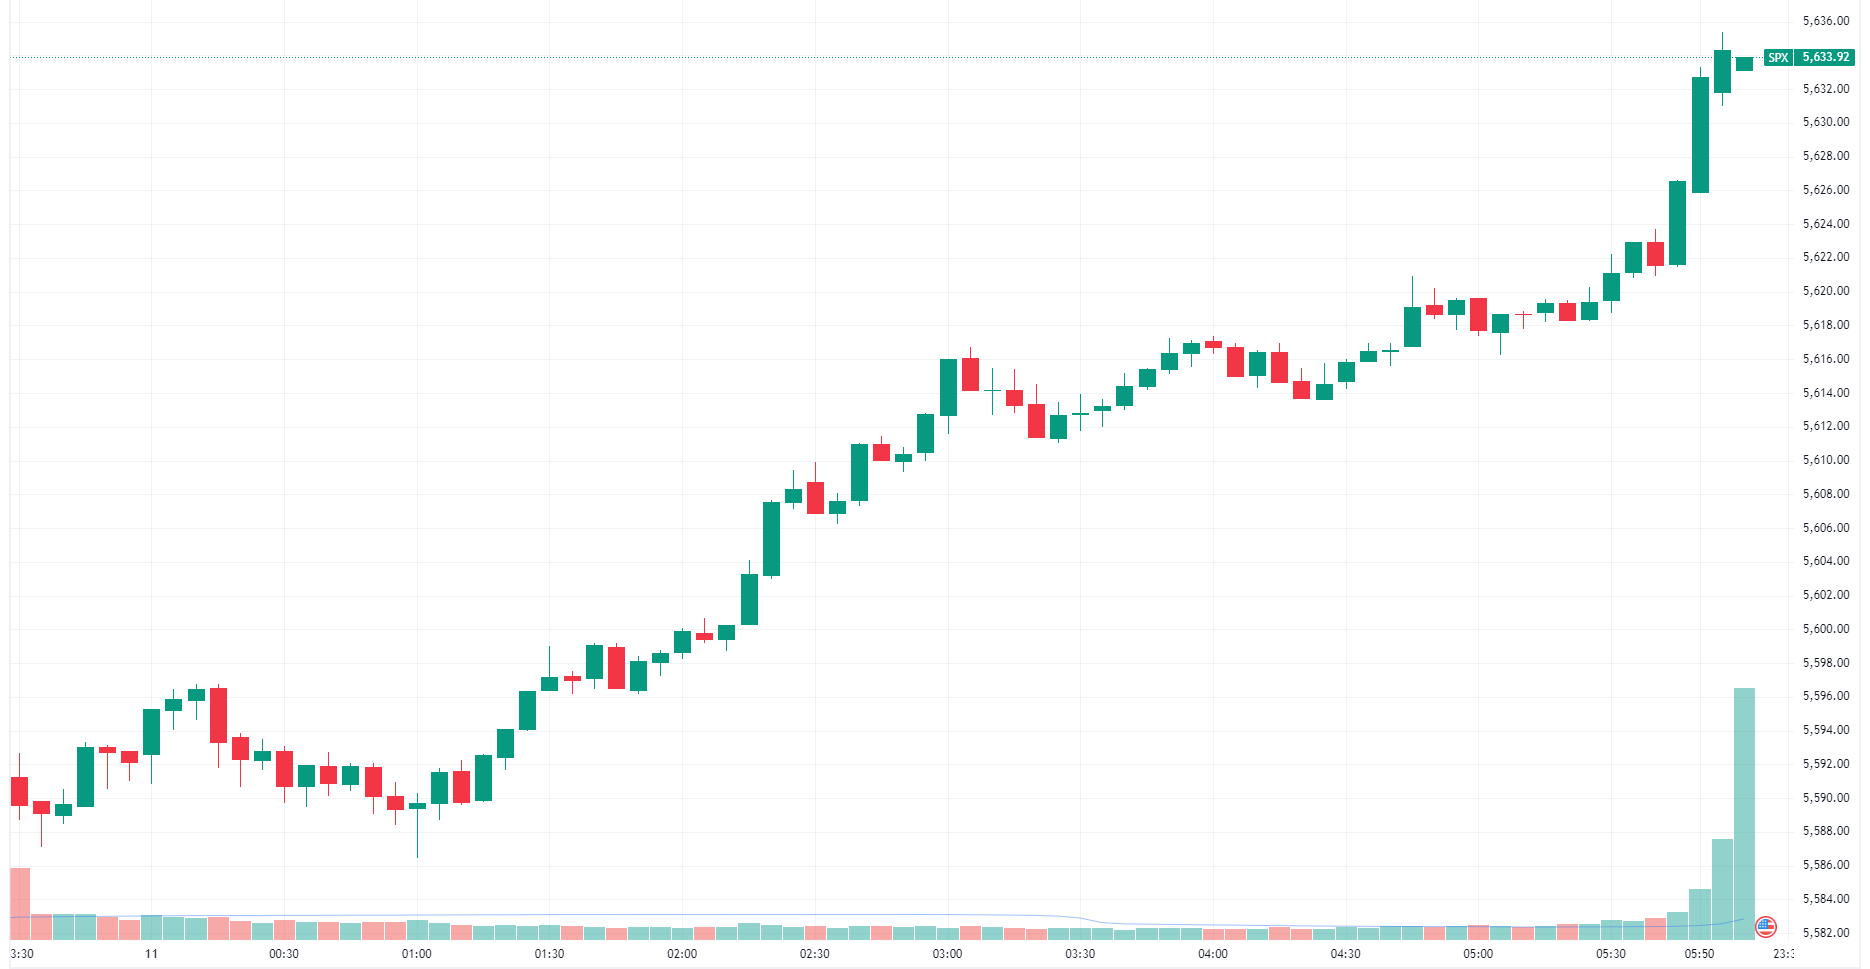 S&P 500 rips higher to close at fresh all-time highs (Source: TradingView)